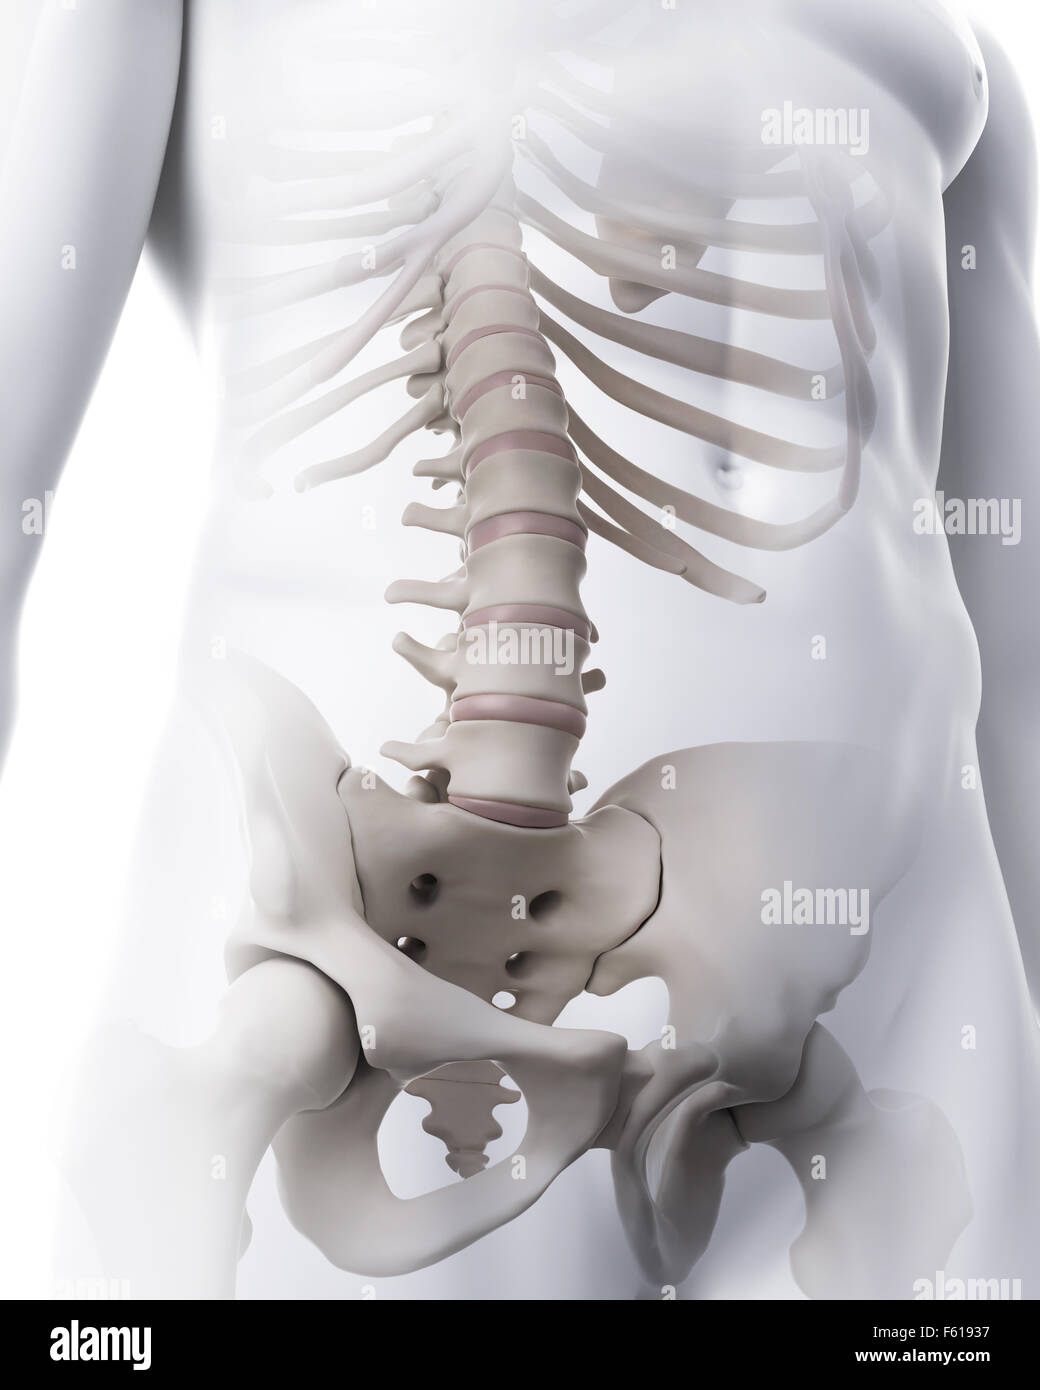 medically accurate illustration of the lumbar spine Stock Photo